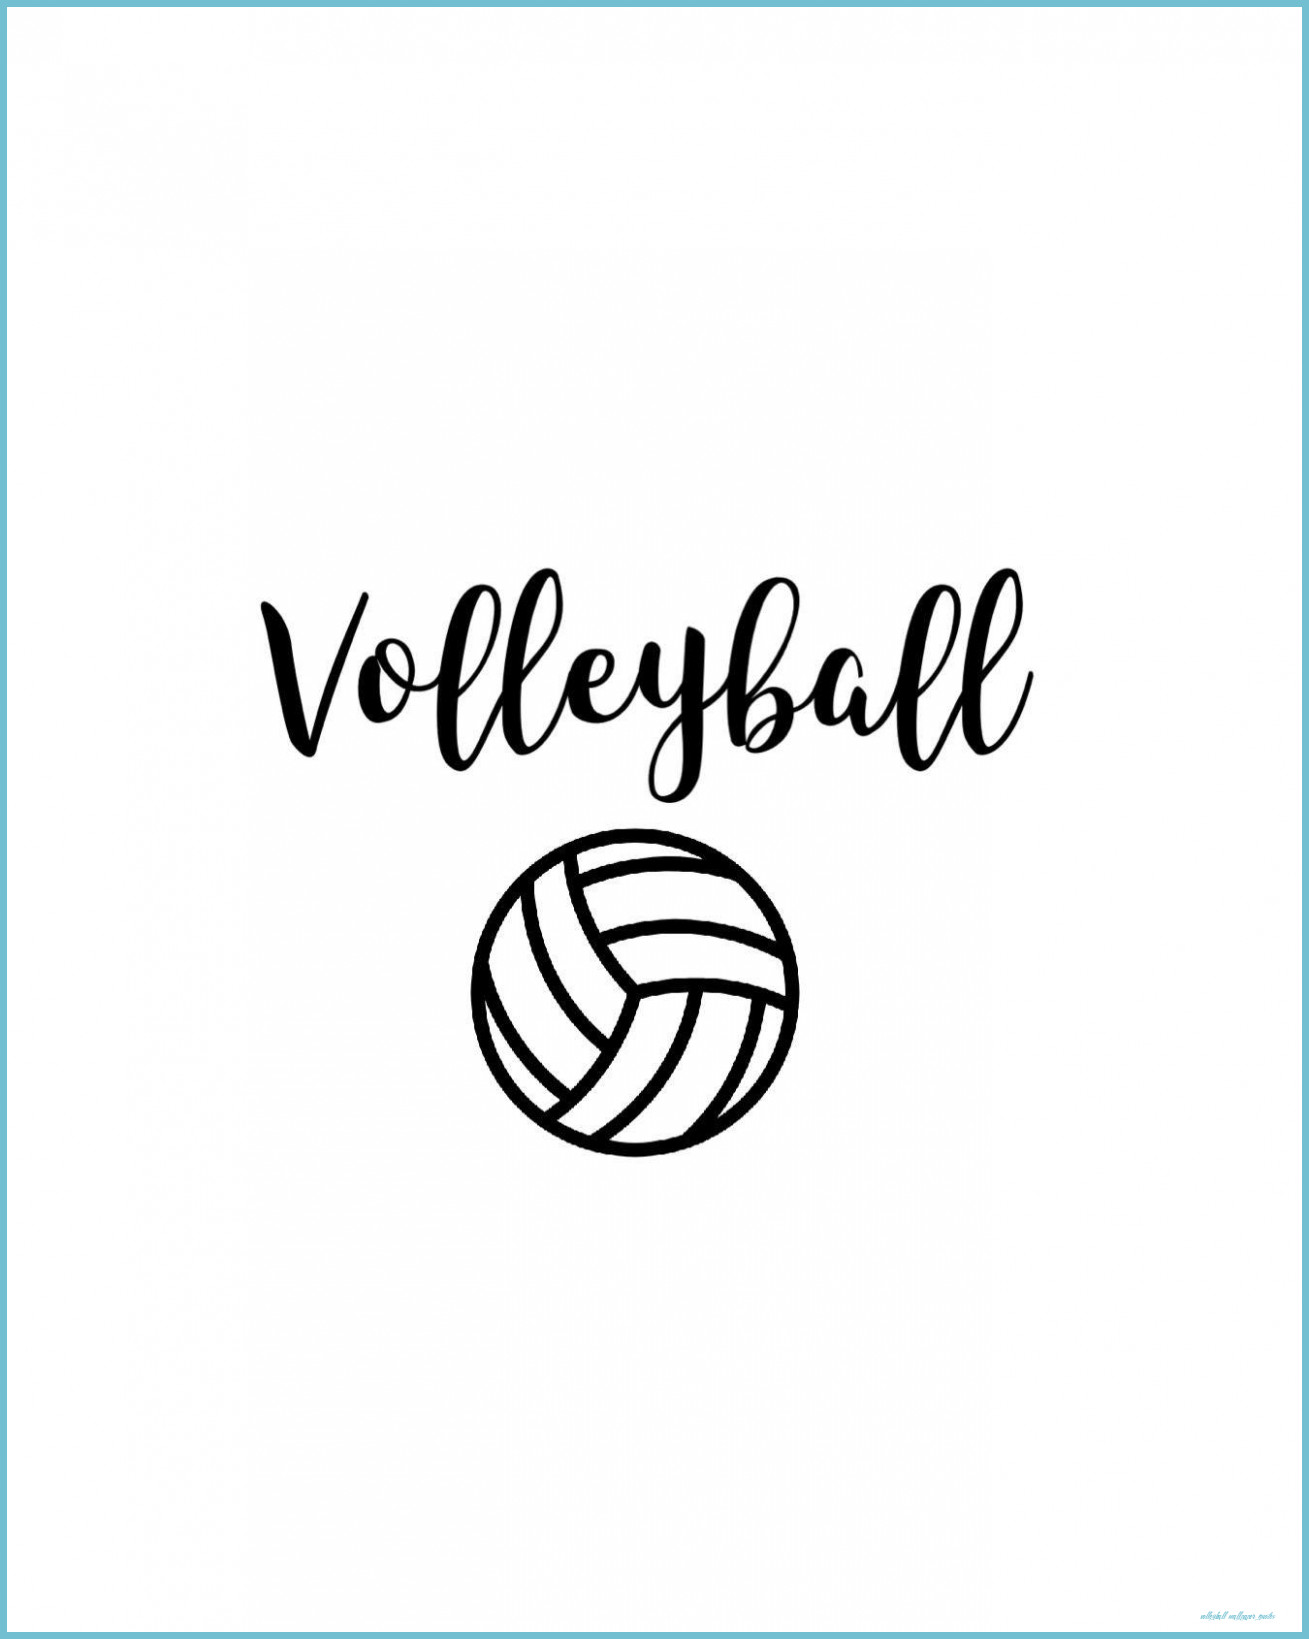 Volleyball Quotes Wallpaper Wallpaper Quotes